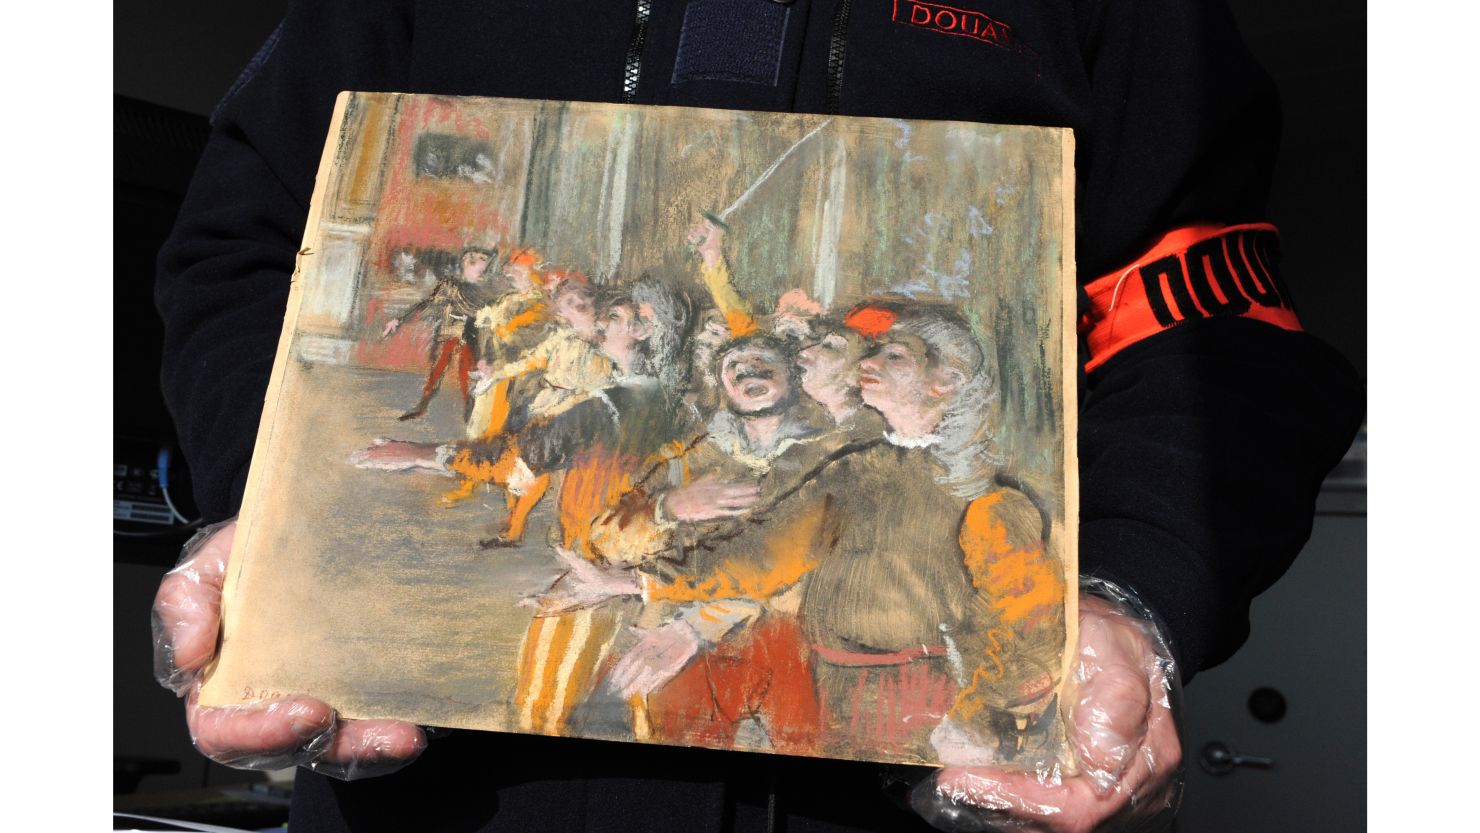 The unframed Edgar Degas painting was recently found by customs agents.